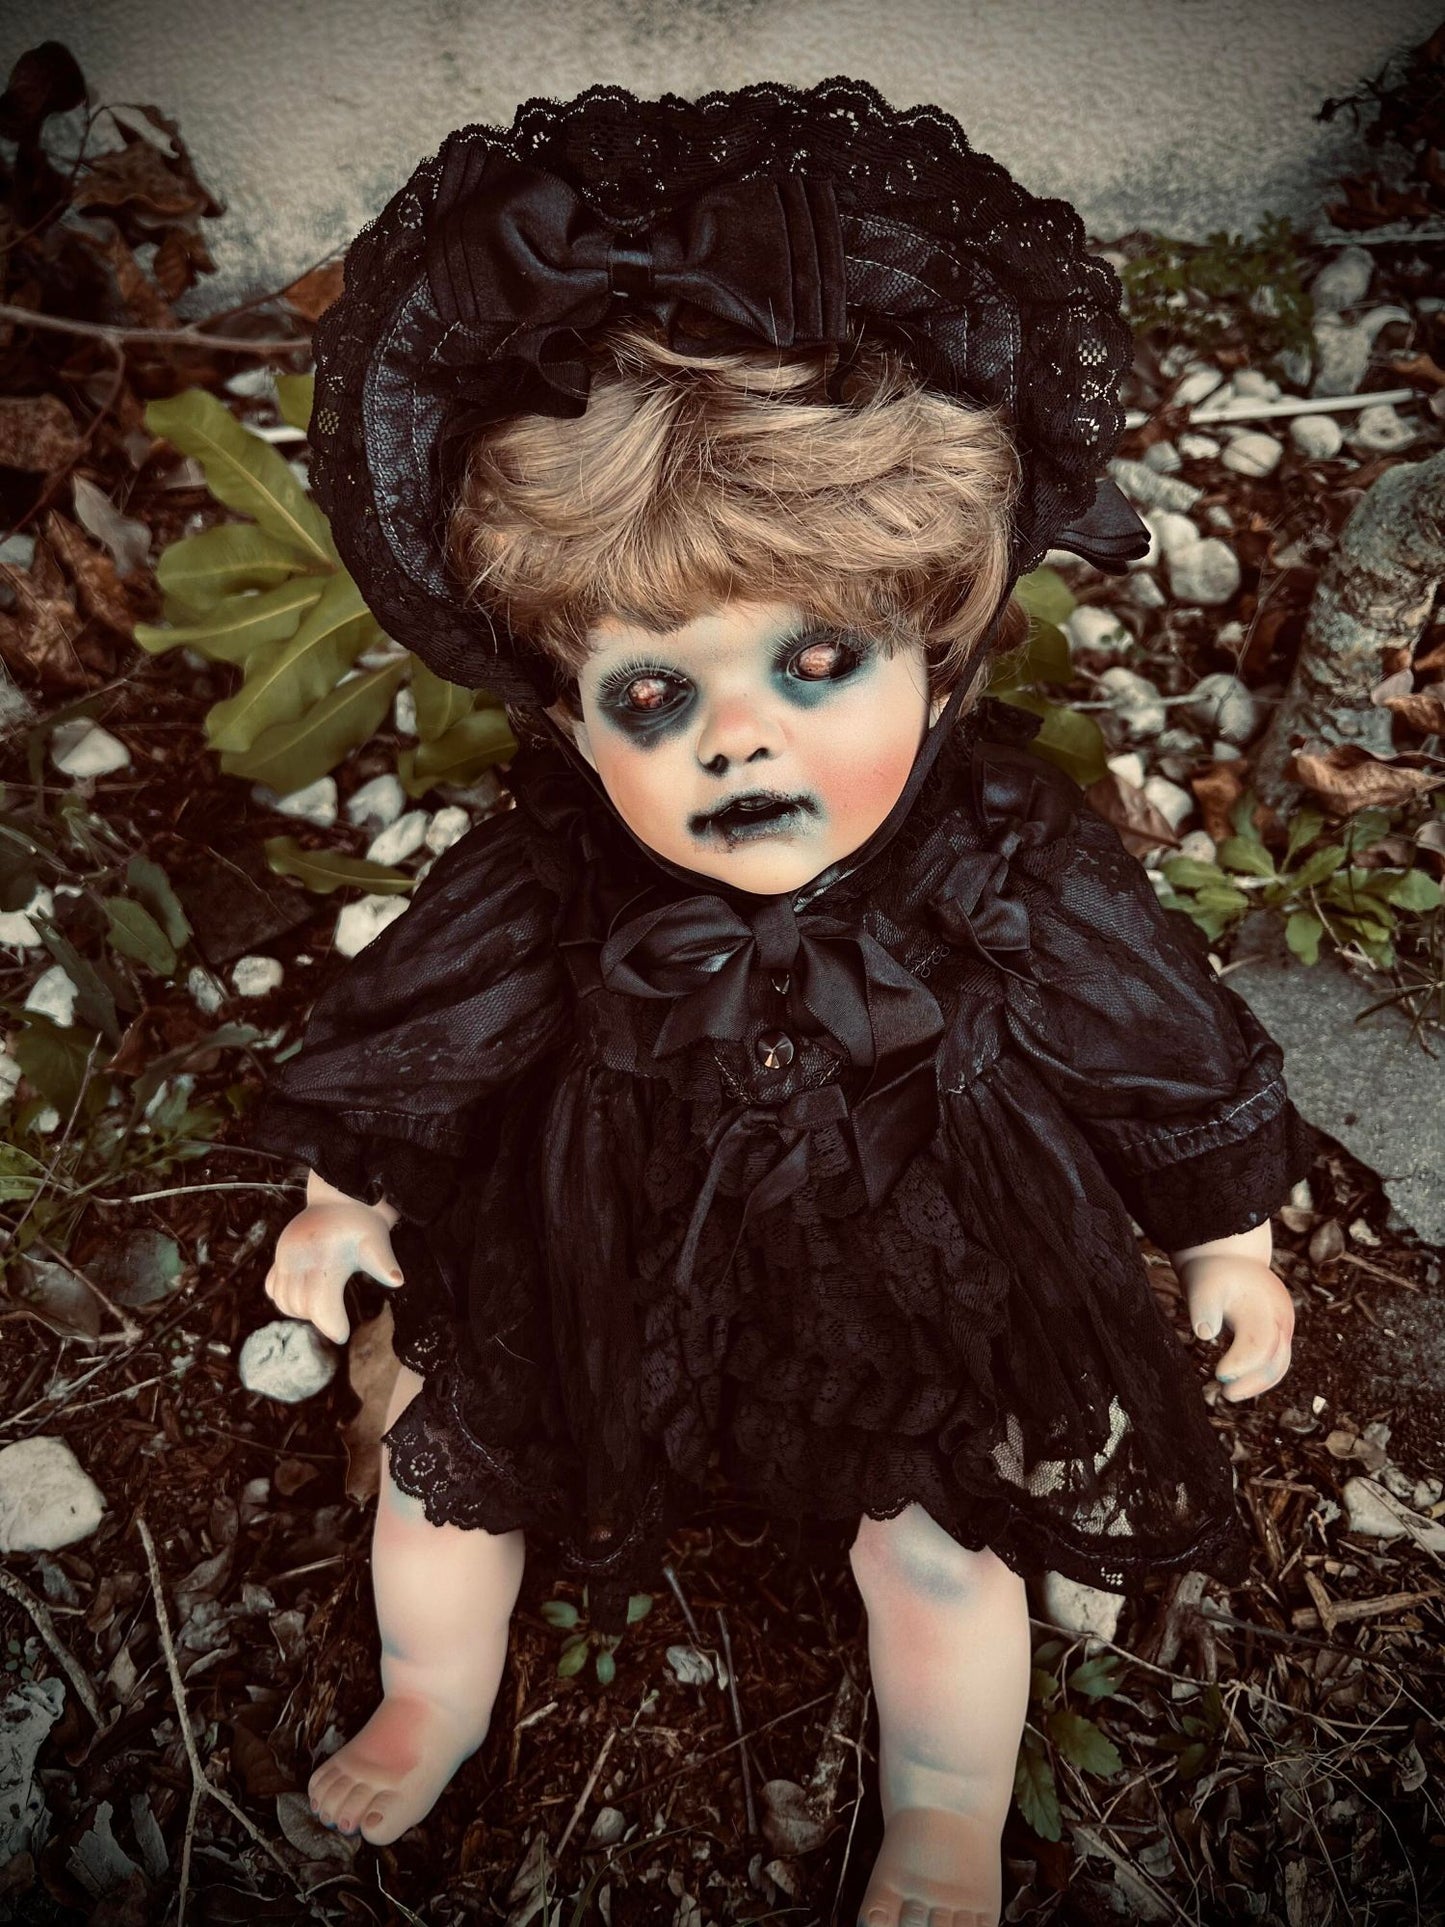 Meet Gwen 23" Doll Porcelain Witchy Creepy Haunted Spirit Infected Scary Spooky Zombie Possessed Gothic Positive Energy Undead Occult